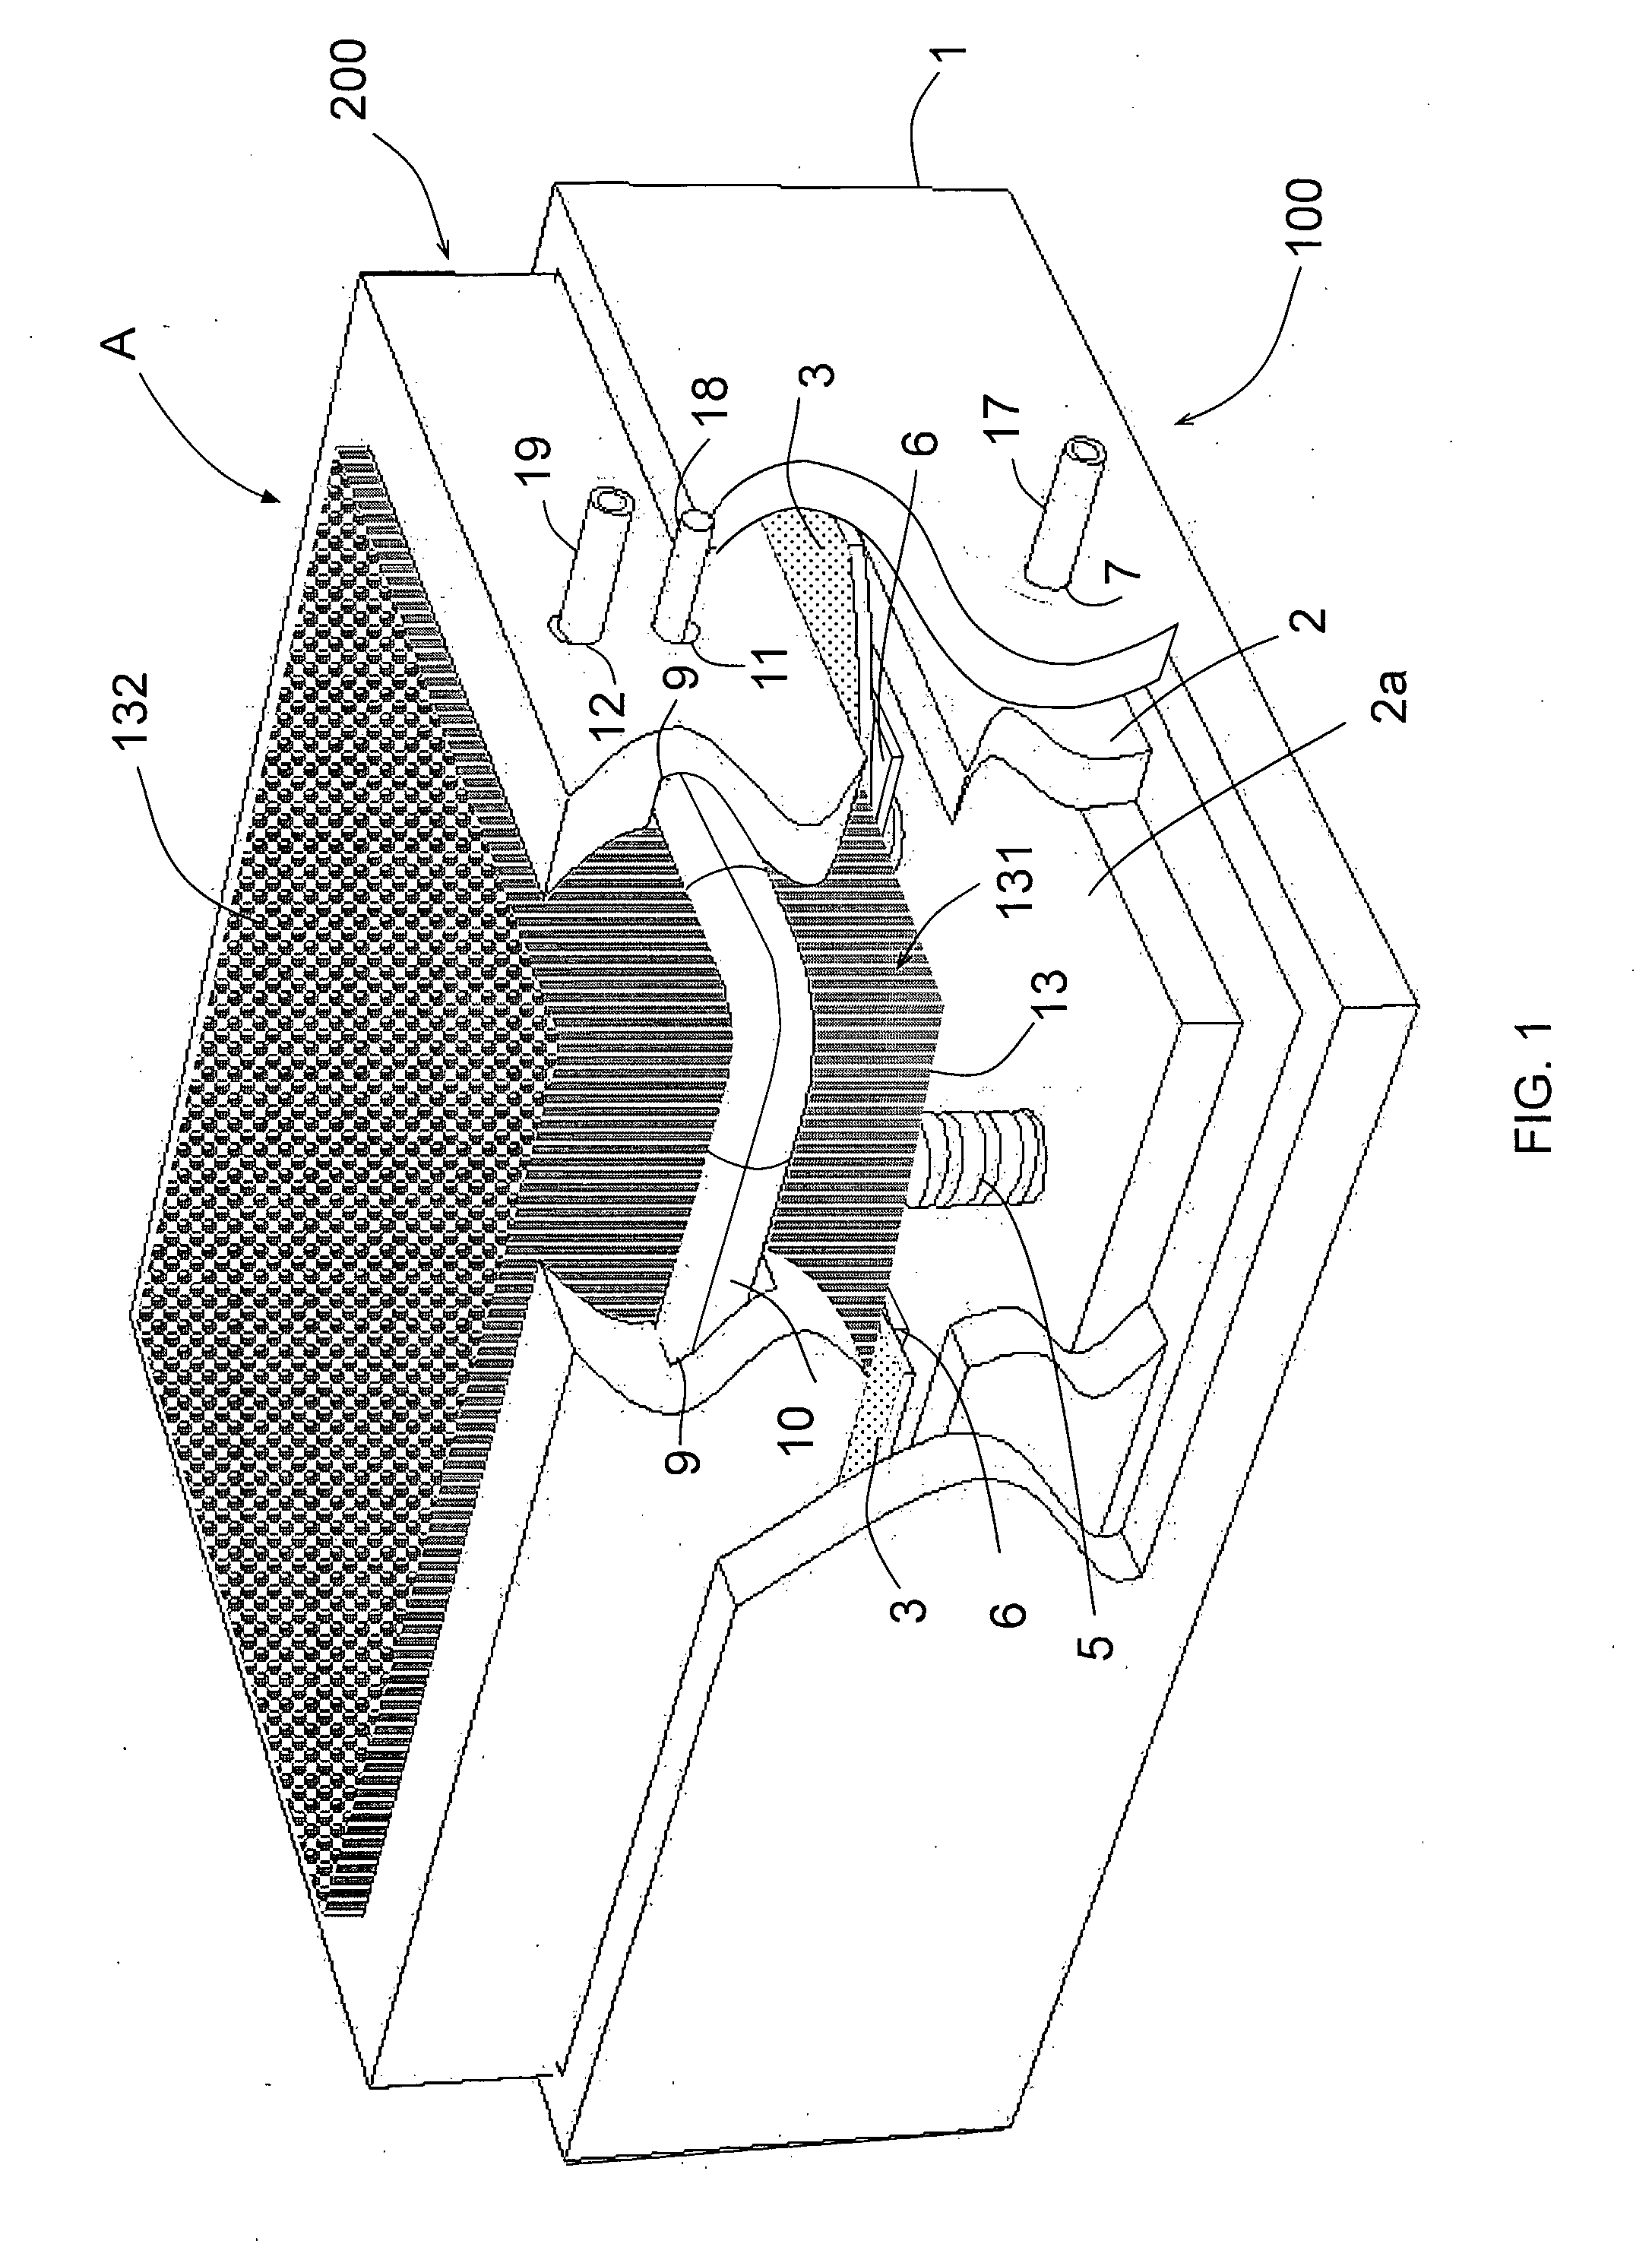 Apparatus and Method for Replicating a Plantar Surface of a Foot